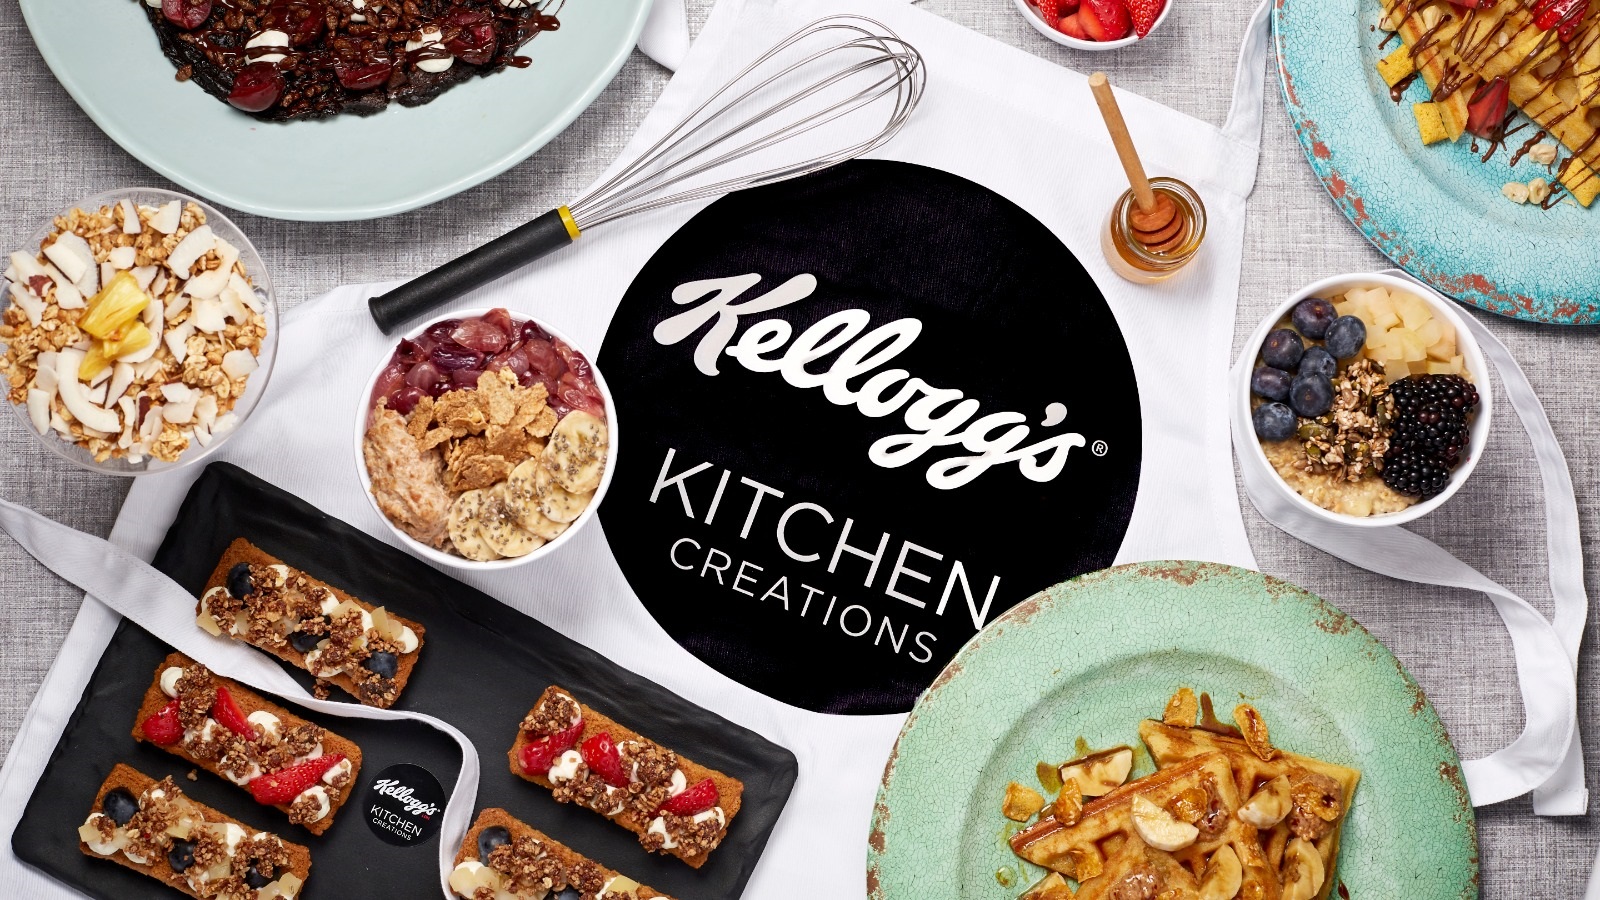 Kellogg launches plant-based meal delivery service with Deliveroo: 'It is  important we are bold'